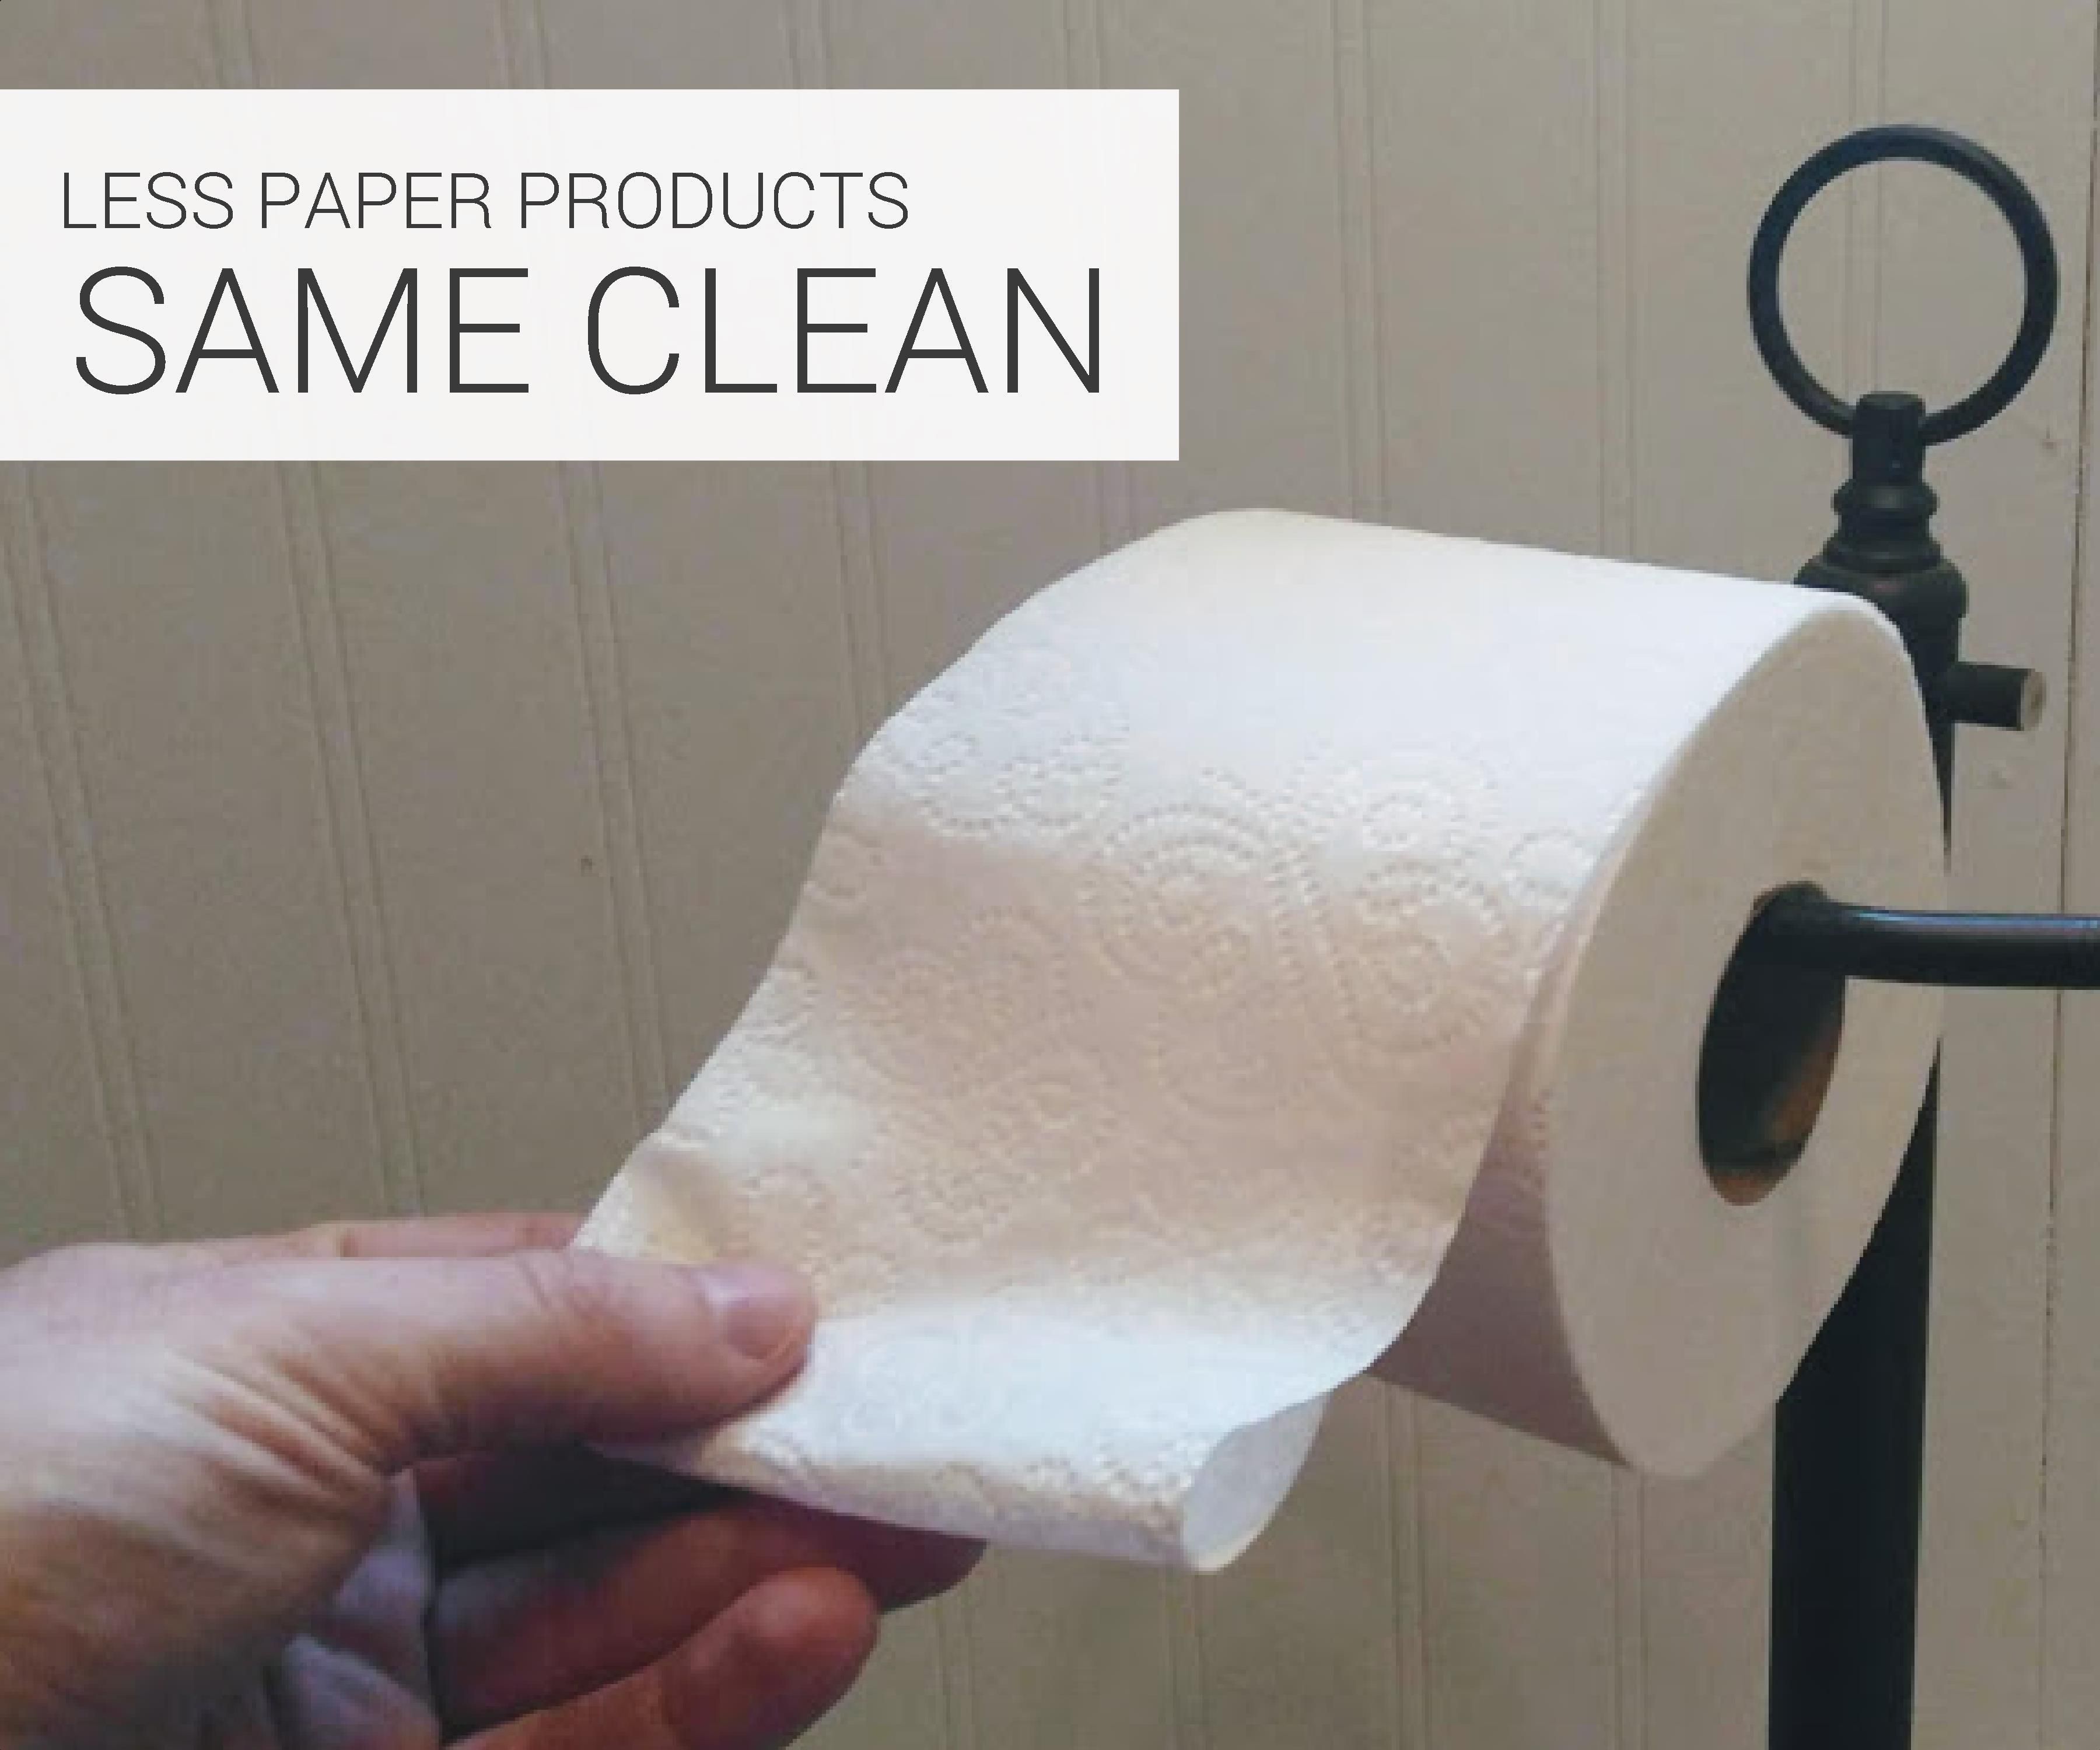 Less Paper Products. Same Clean!